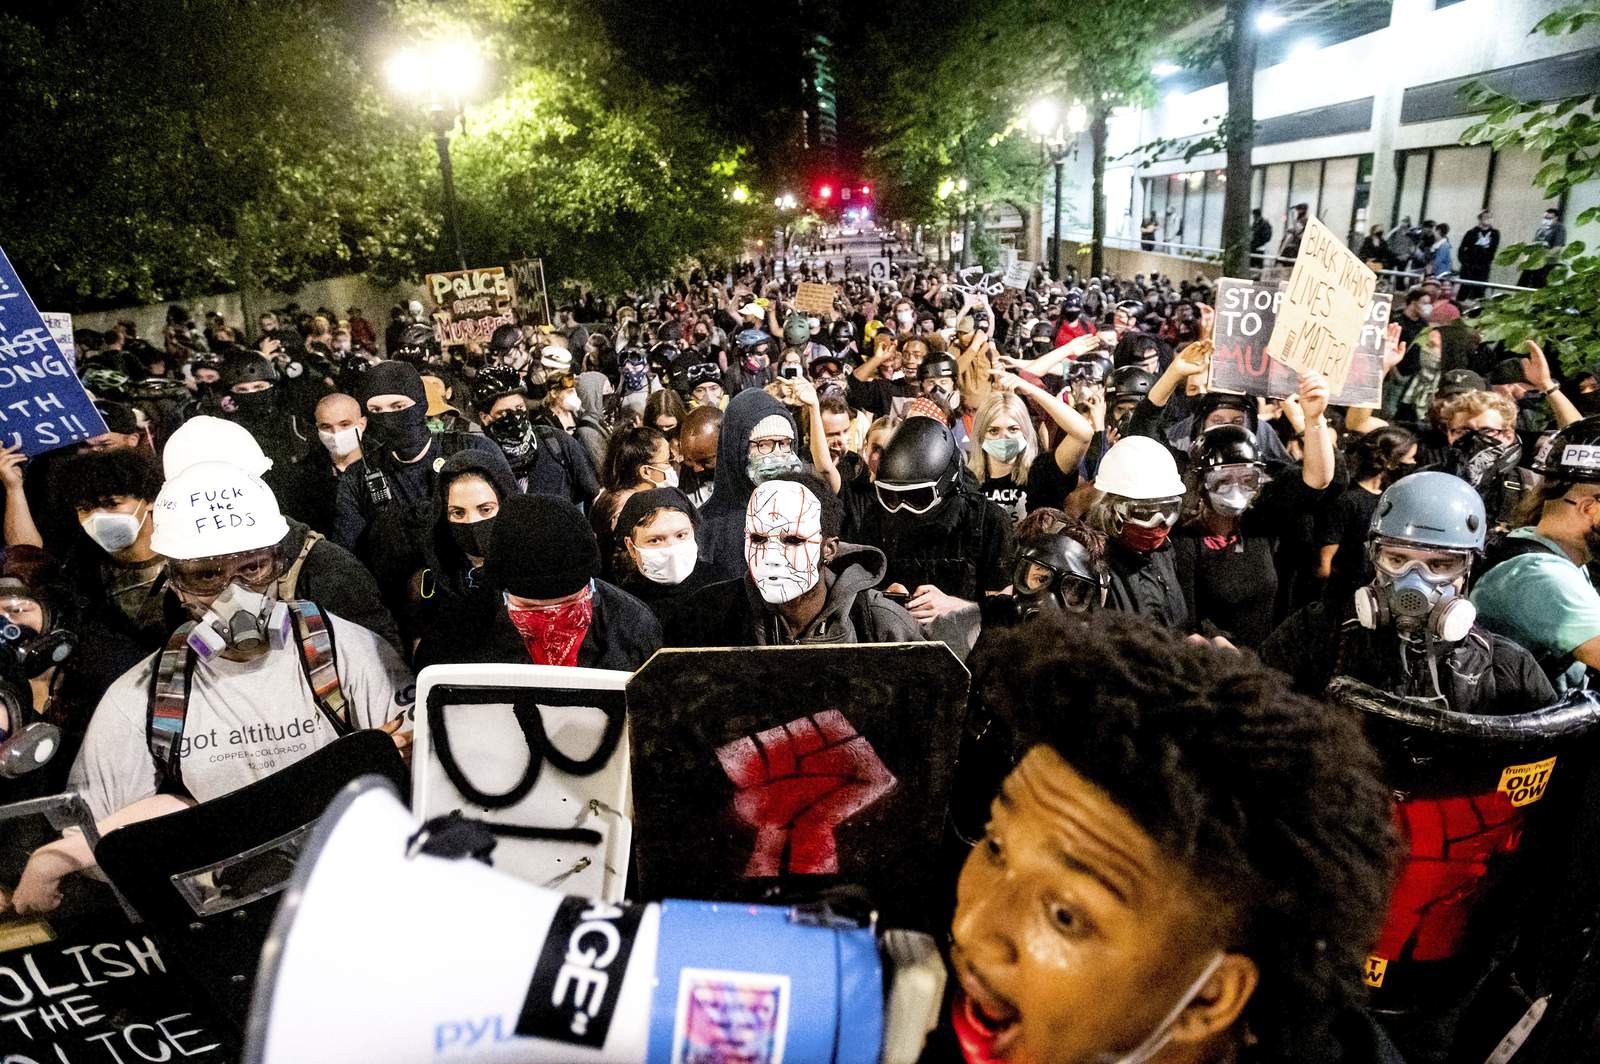 Police 'unlawful assembly' powers come under fire in Oregon